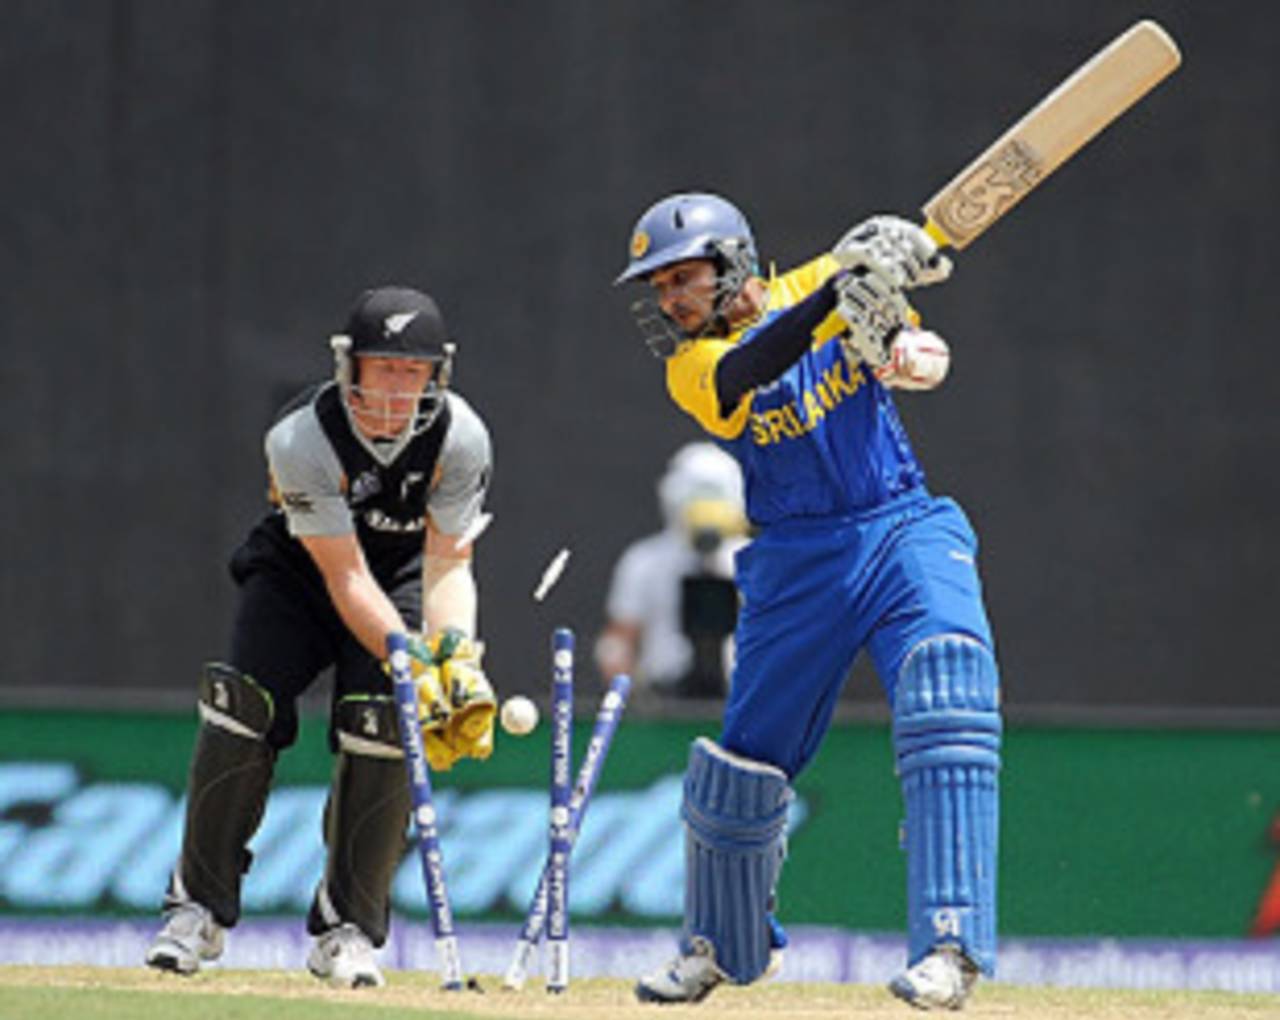 Tillakaratne Dilshan's scratchy innings came to an end when he was bowled by Jacob Oram&nbsp;&nbsp;&bull;&nbsp;&nbsp;AFP